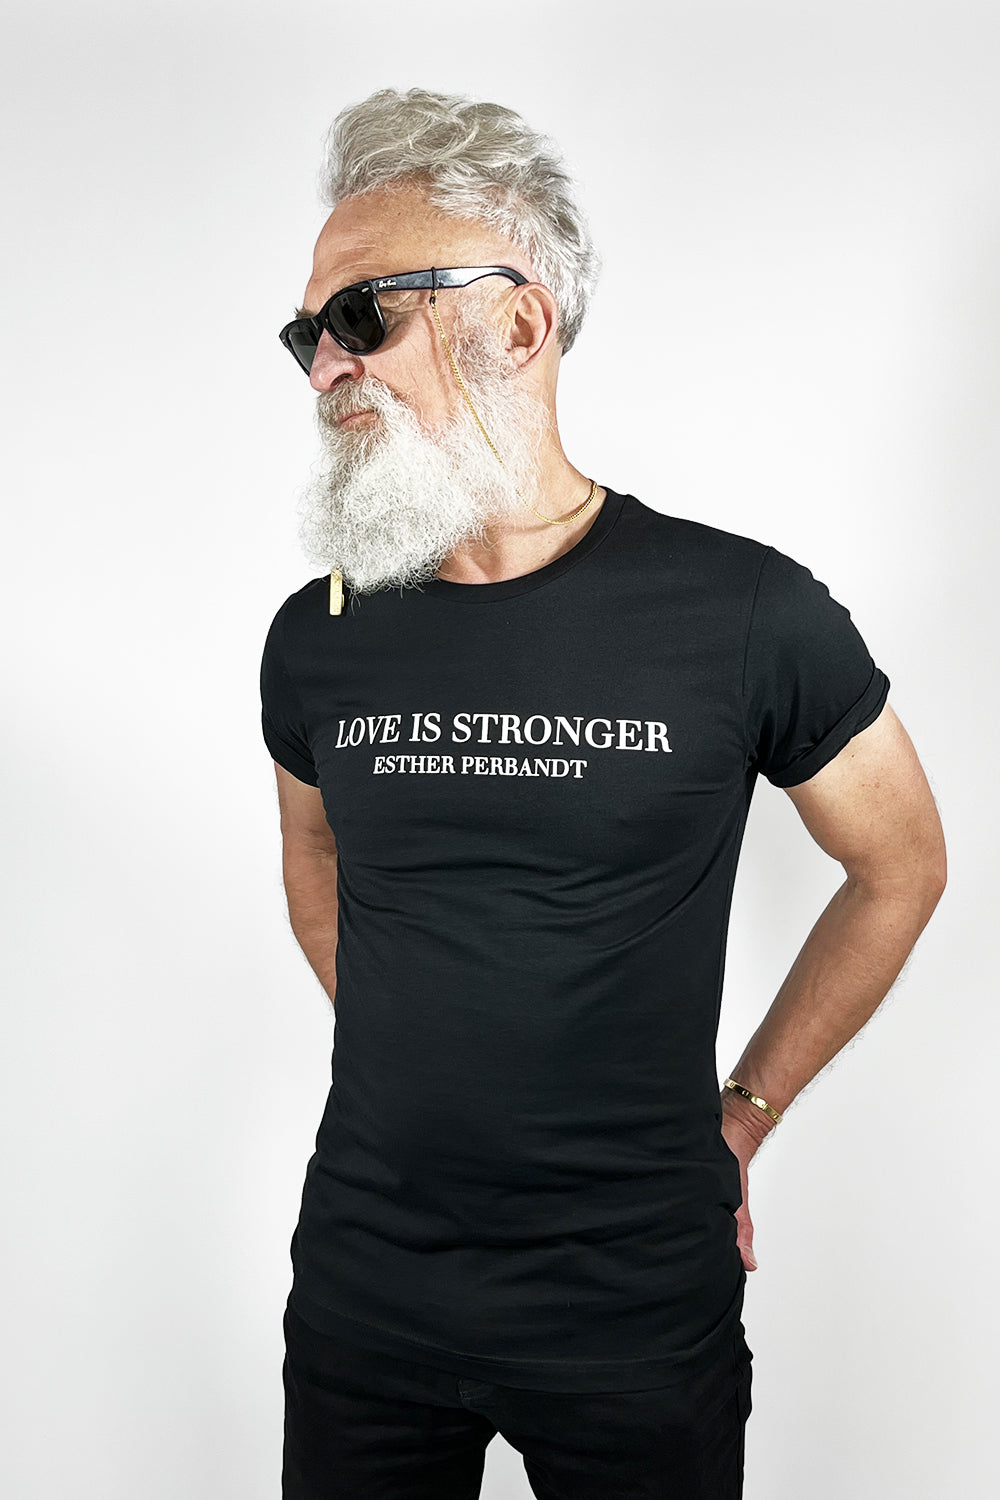 LOVE IS STRONGER - Statement T-Shirt